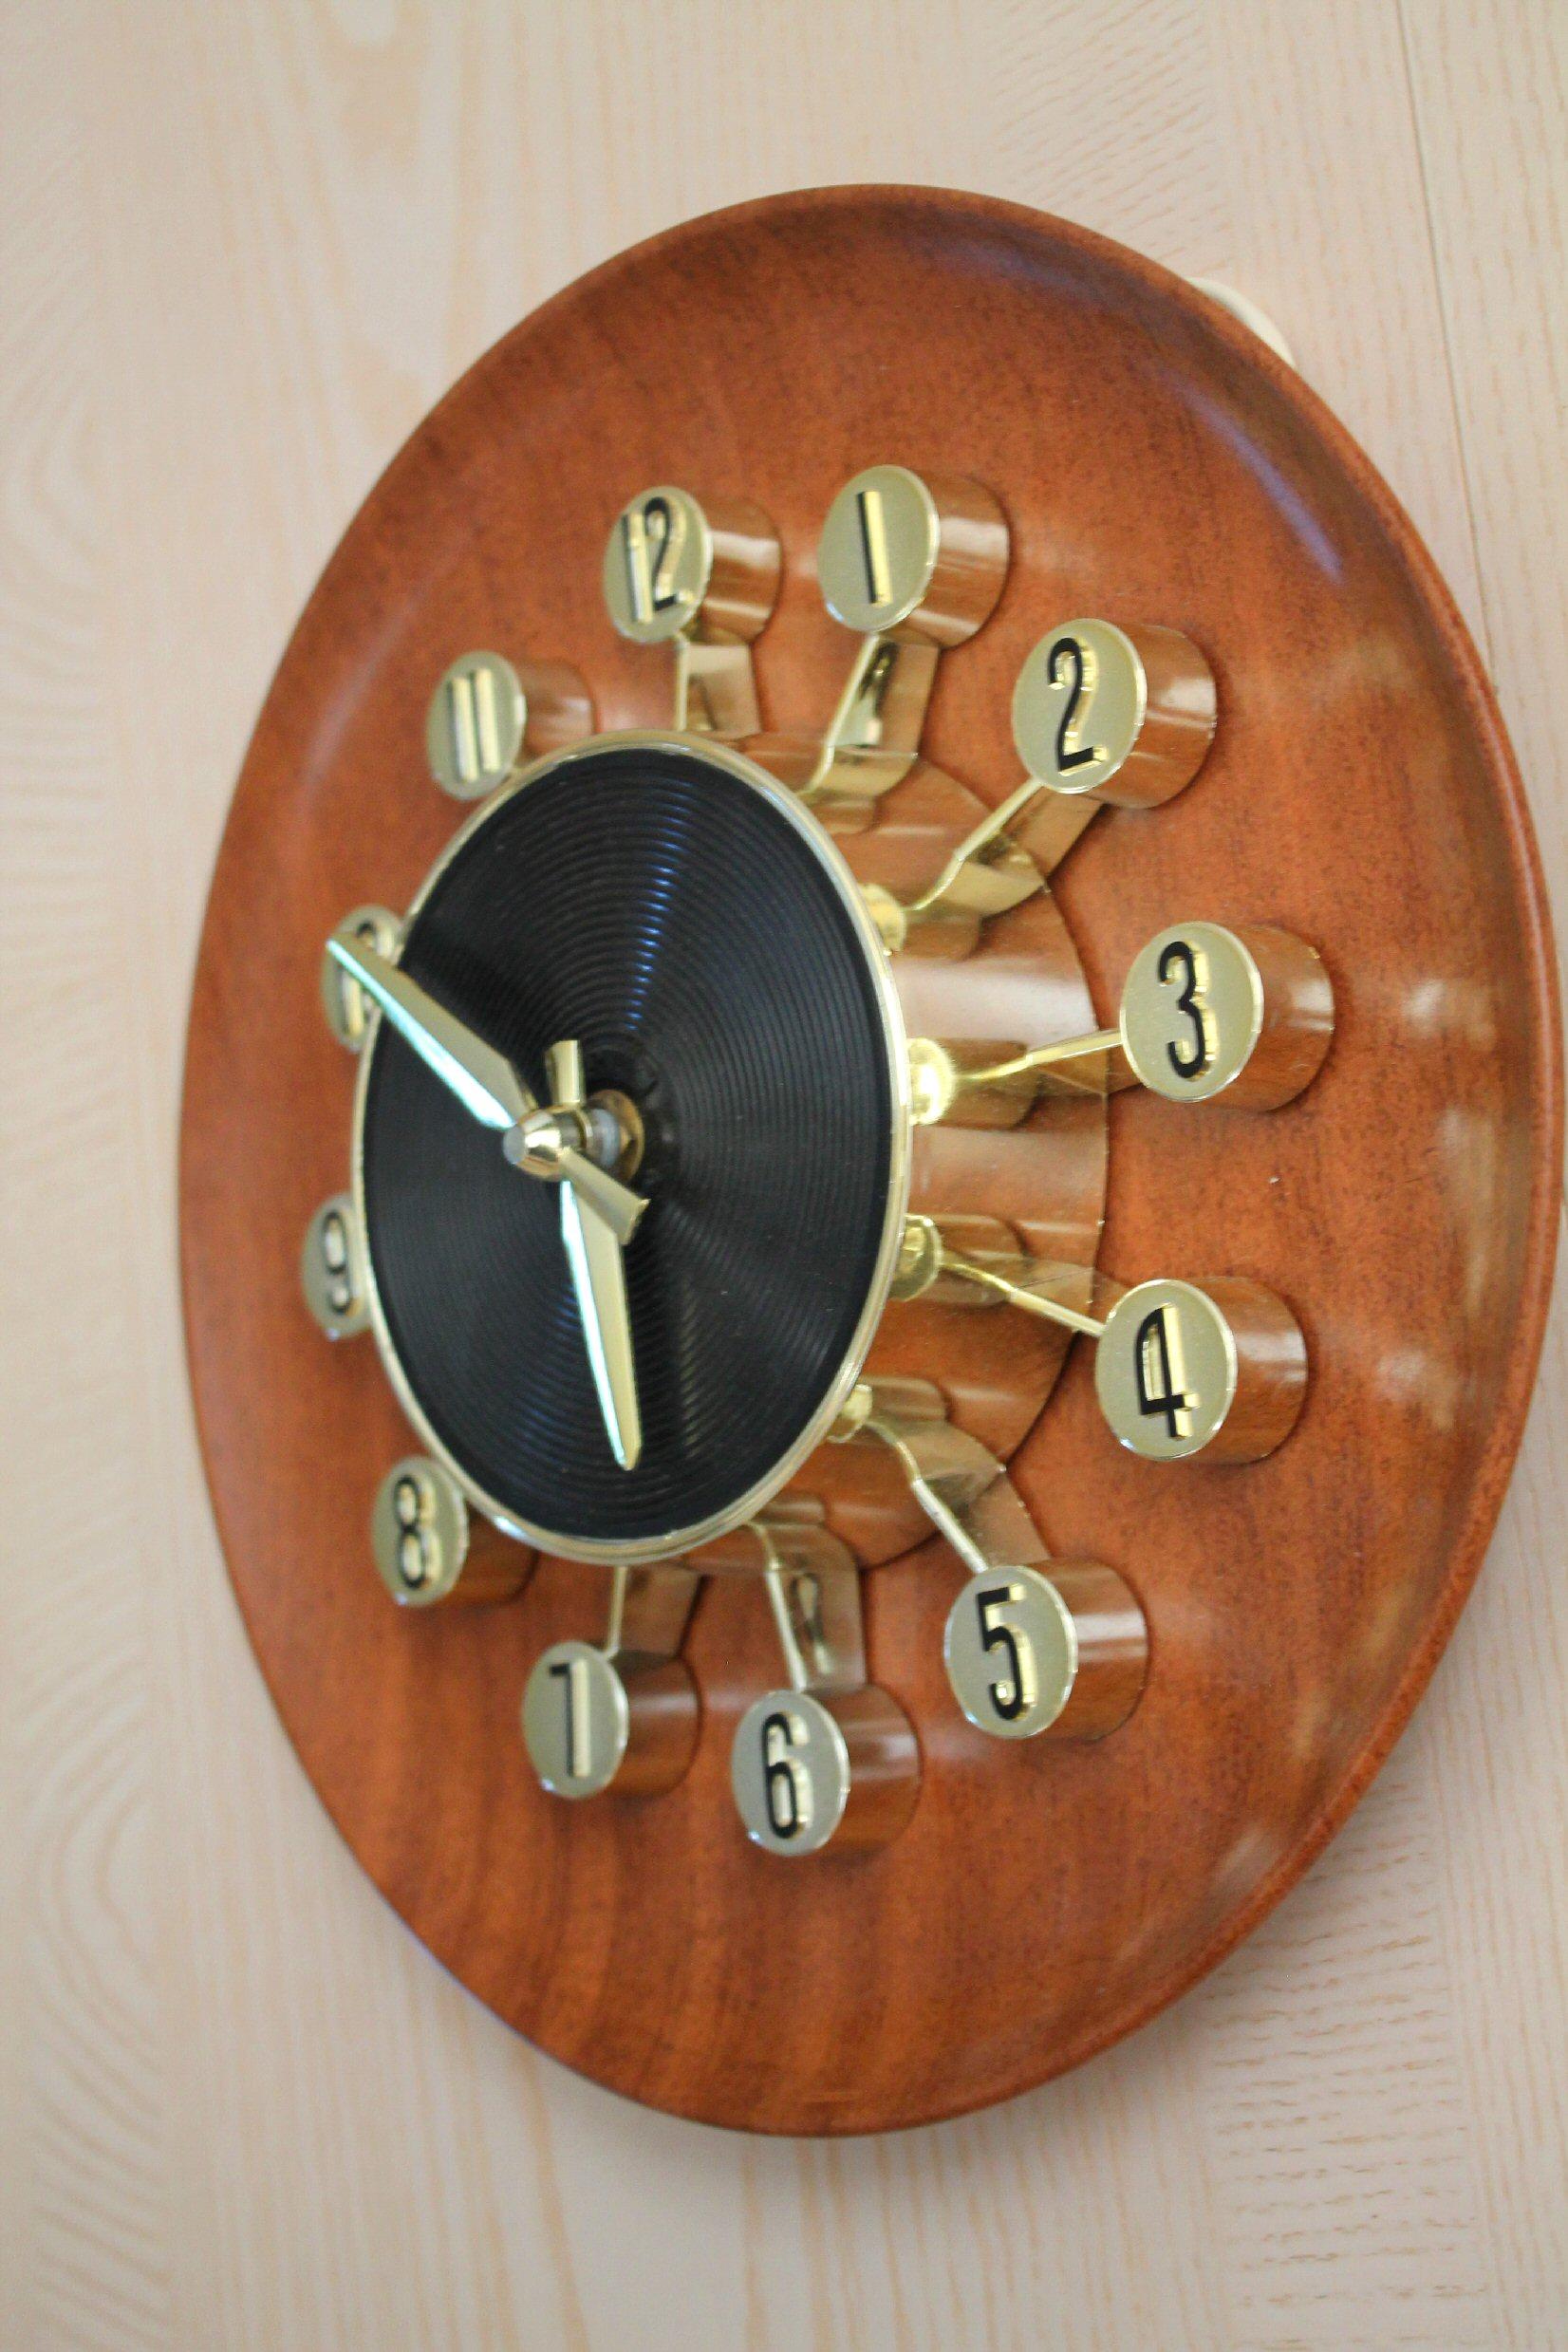 Time Warp!

1959 Sputnik Styled 
Spartus Wall Clock

New Old Stock! 
Mint Vintage Condition!

This is a spectacular find! An unused Sputnik style mid century modern Spartus  wall clock! Gold hands and golden sputnik shape that has the numbers on it.